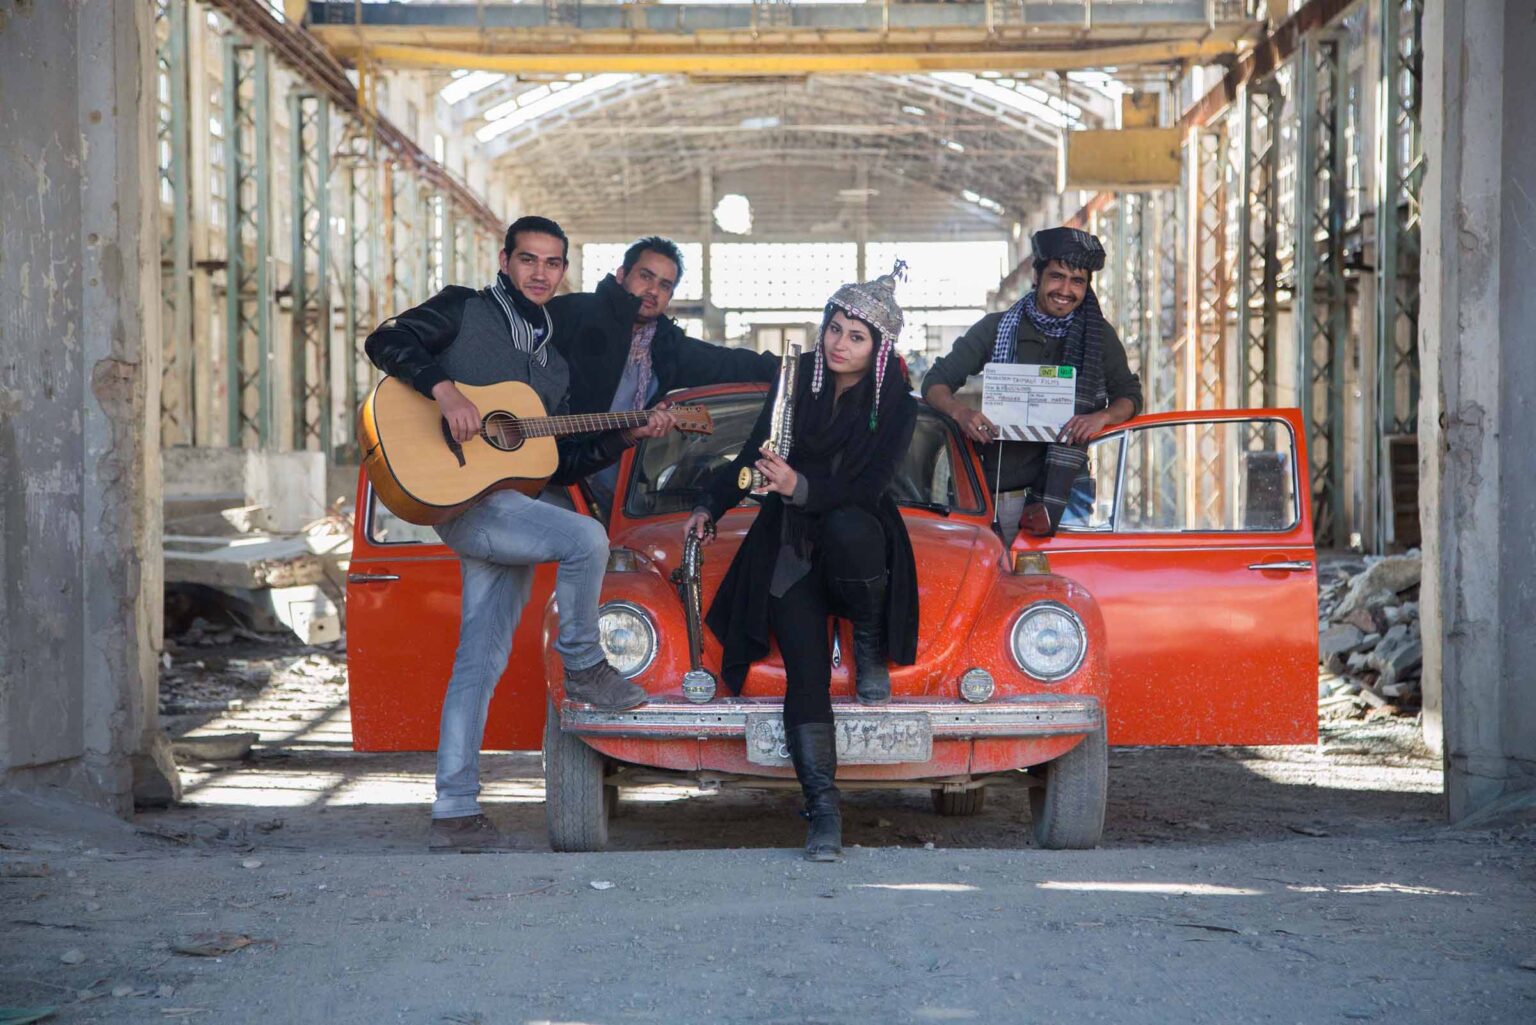 'Kabullywood' captures the beauty of art in Afghanistan even in the darkest of times. Read our interview with film director Louis Meunier on the movie.